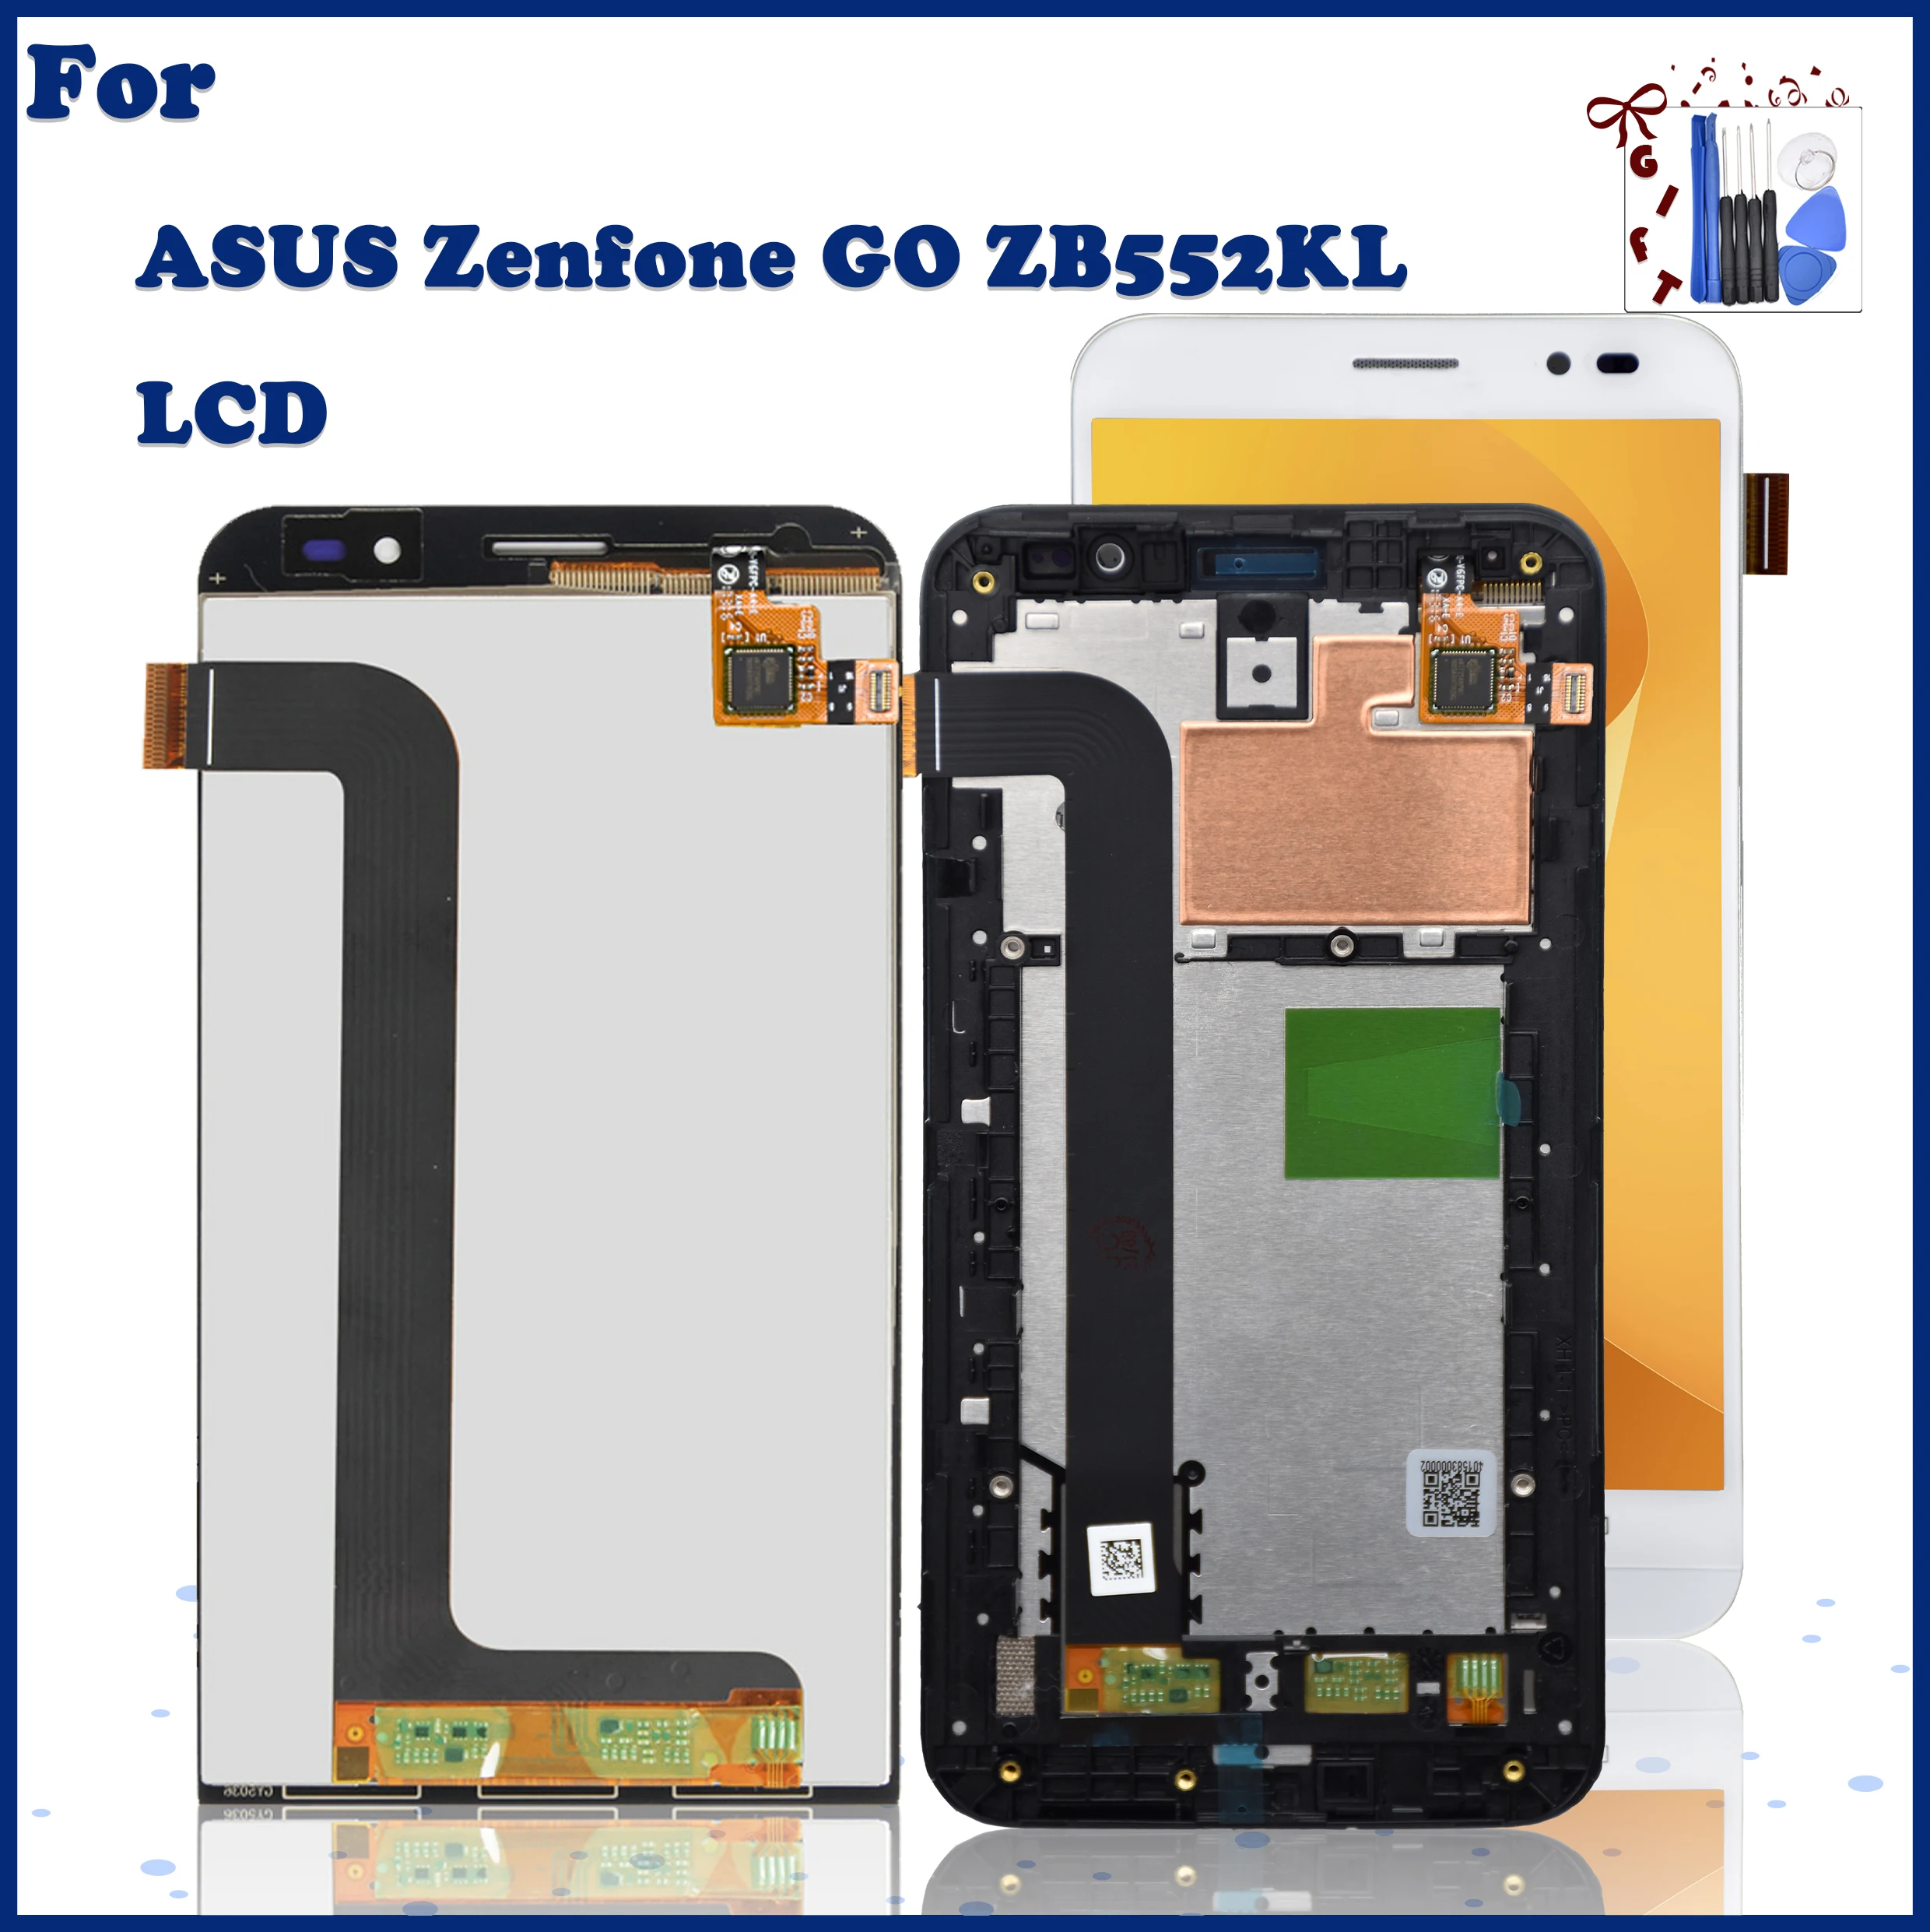 

Origina 5.5"For ASUS Zenfone GO ZB552KL LCD Display Touch Screen Digitizer Assembly for ZB552KL X007D lcd+Frame Replacement